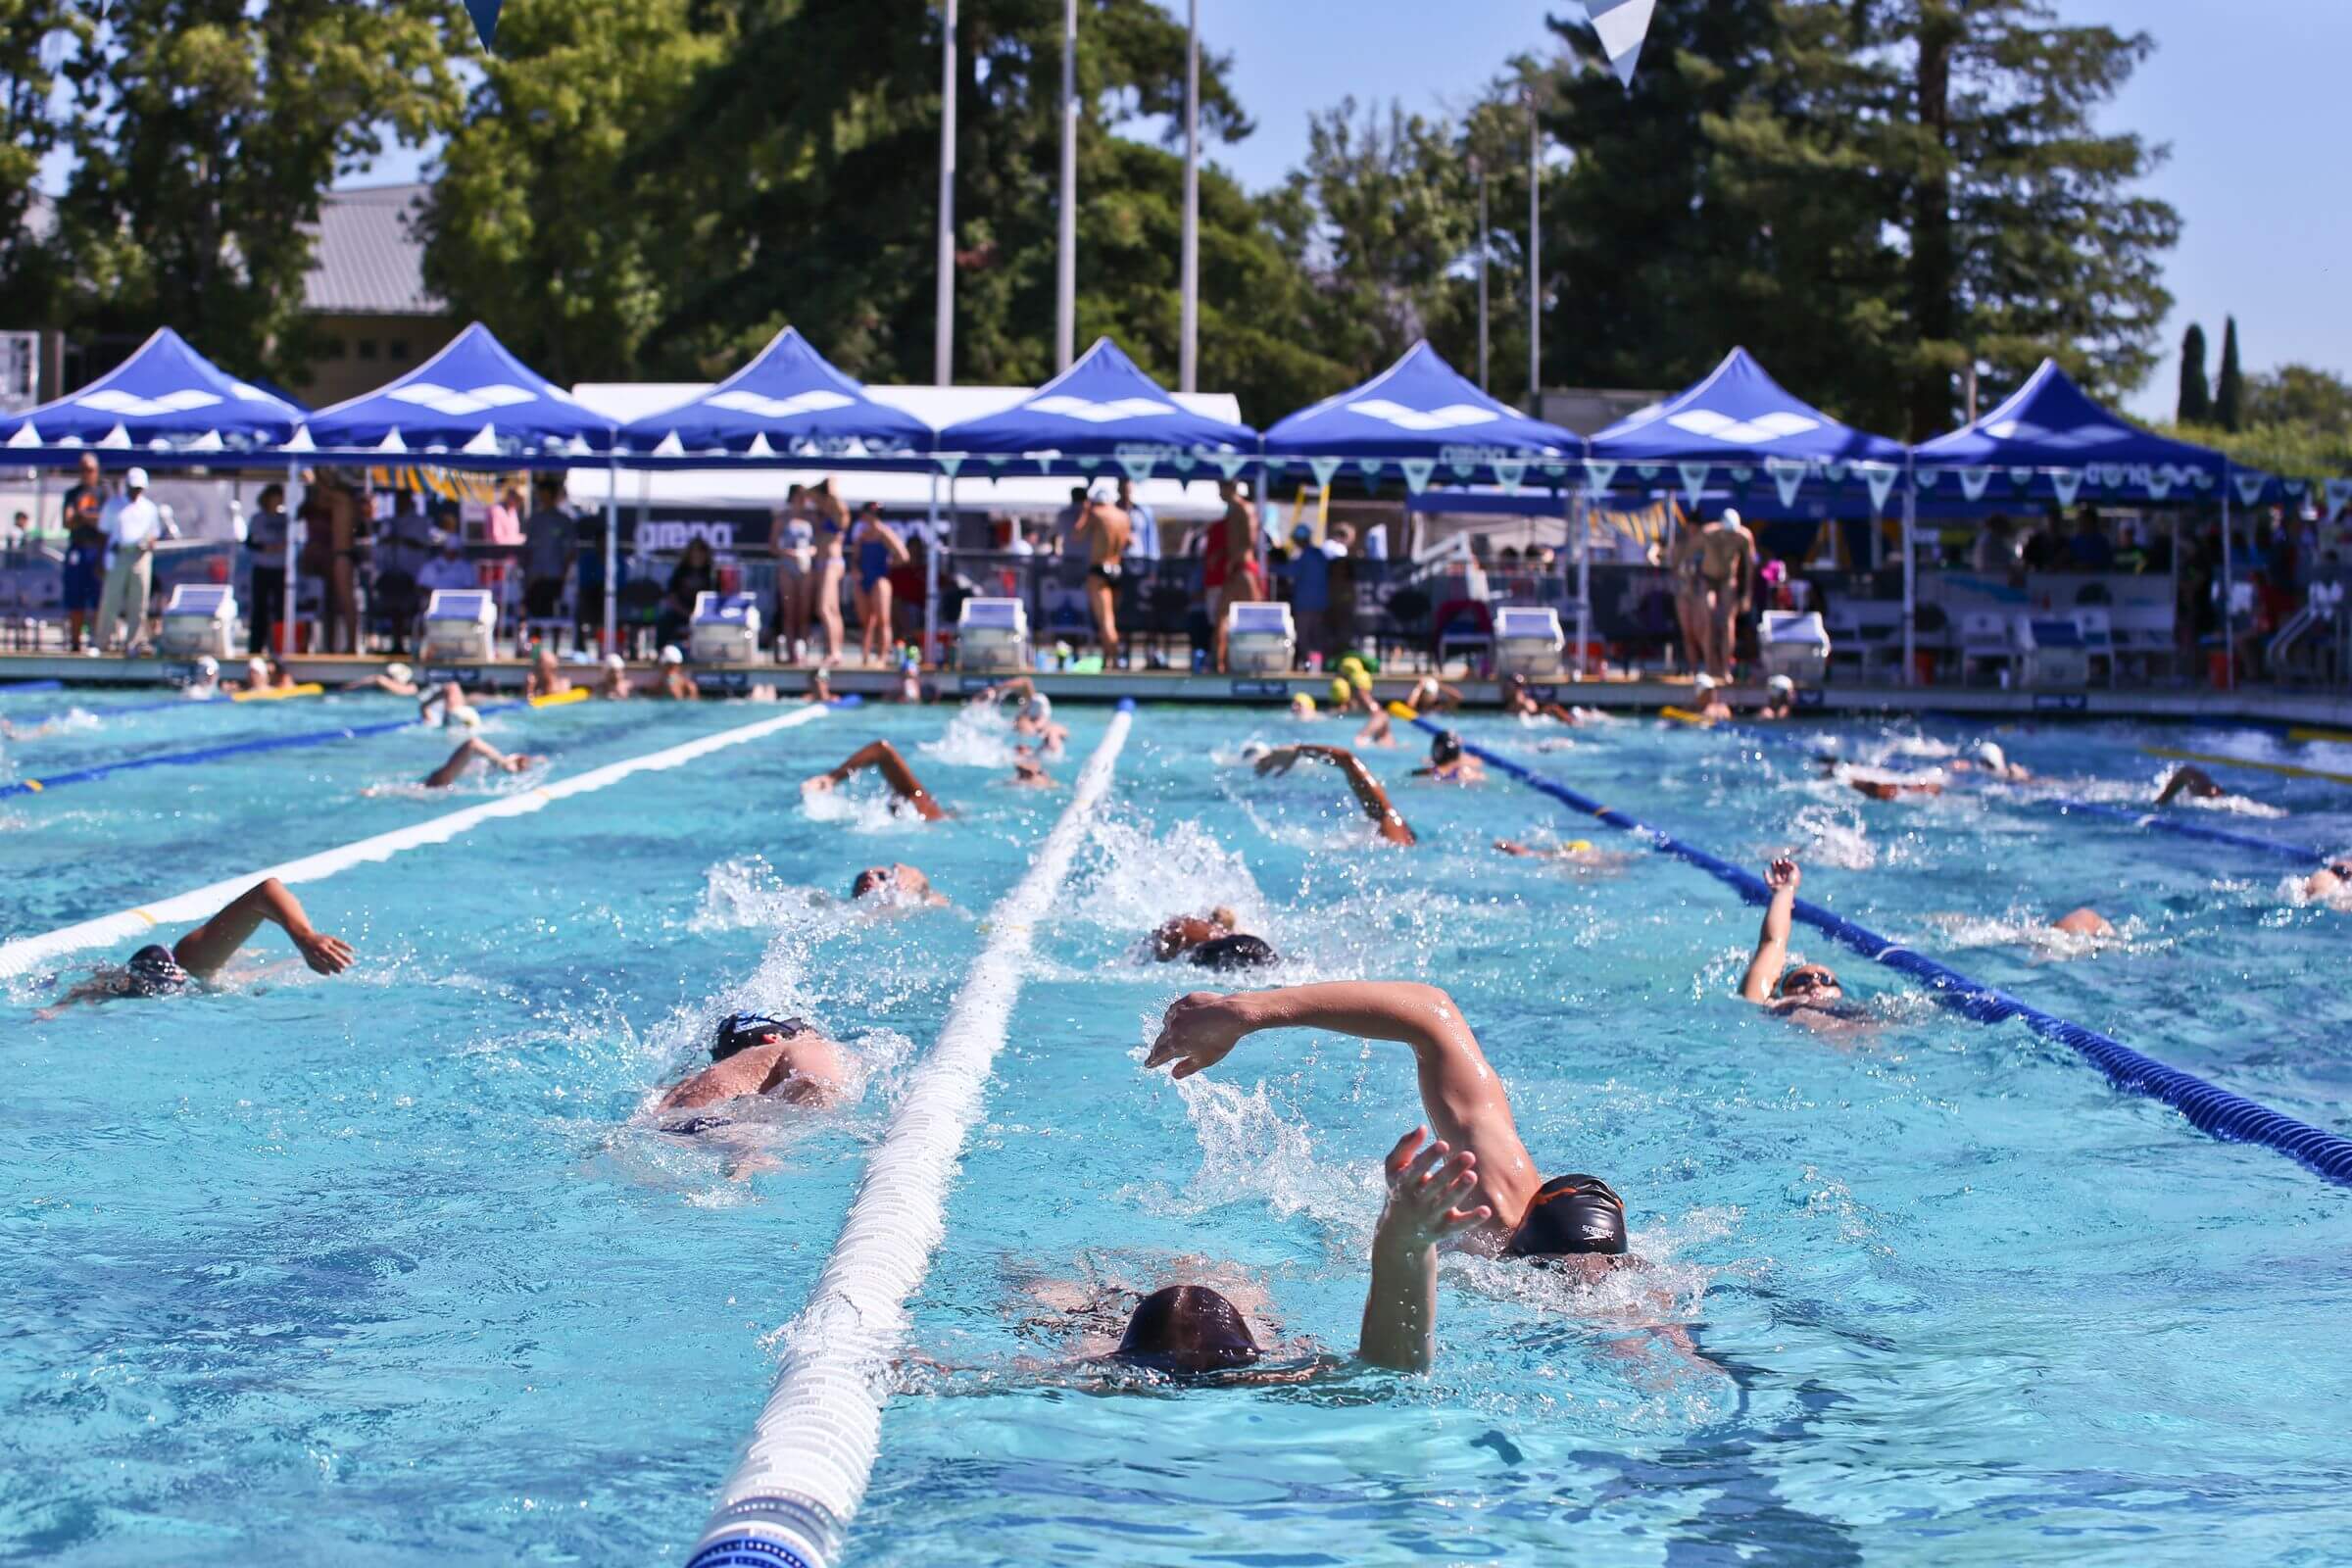 10 Common Things That Drive Swimmers Absolutely Crazy